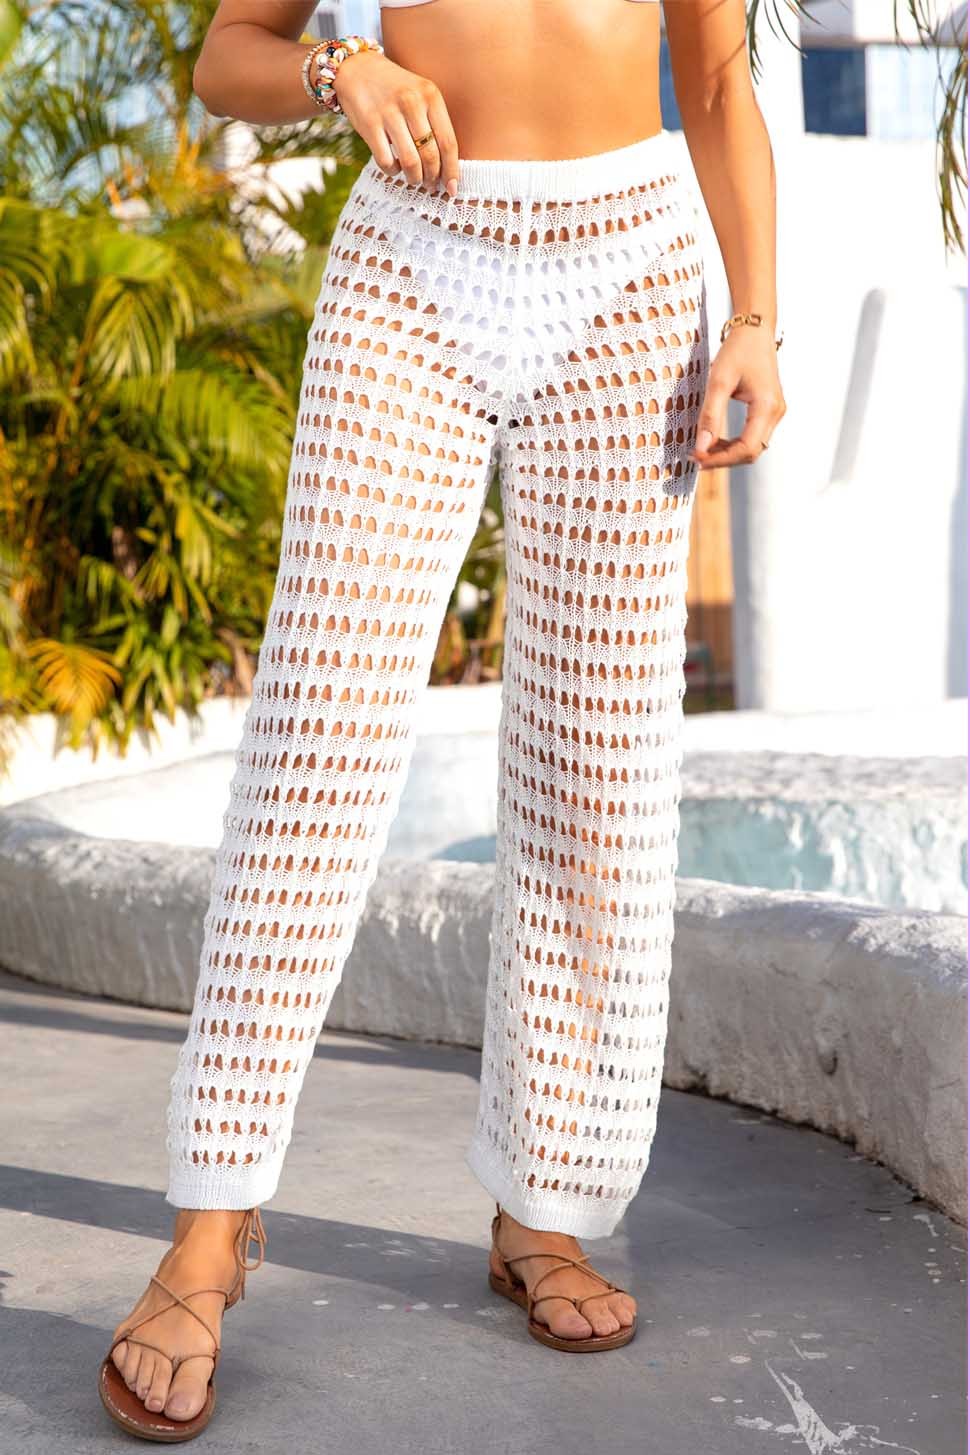 HOLLOW OUT HIGH WAIST MESH BEACH COVER UP PANT - X9C0009